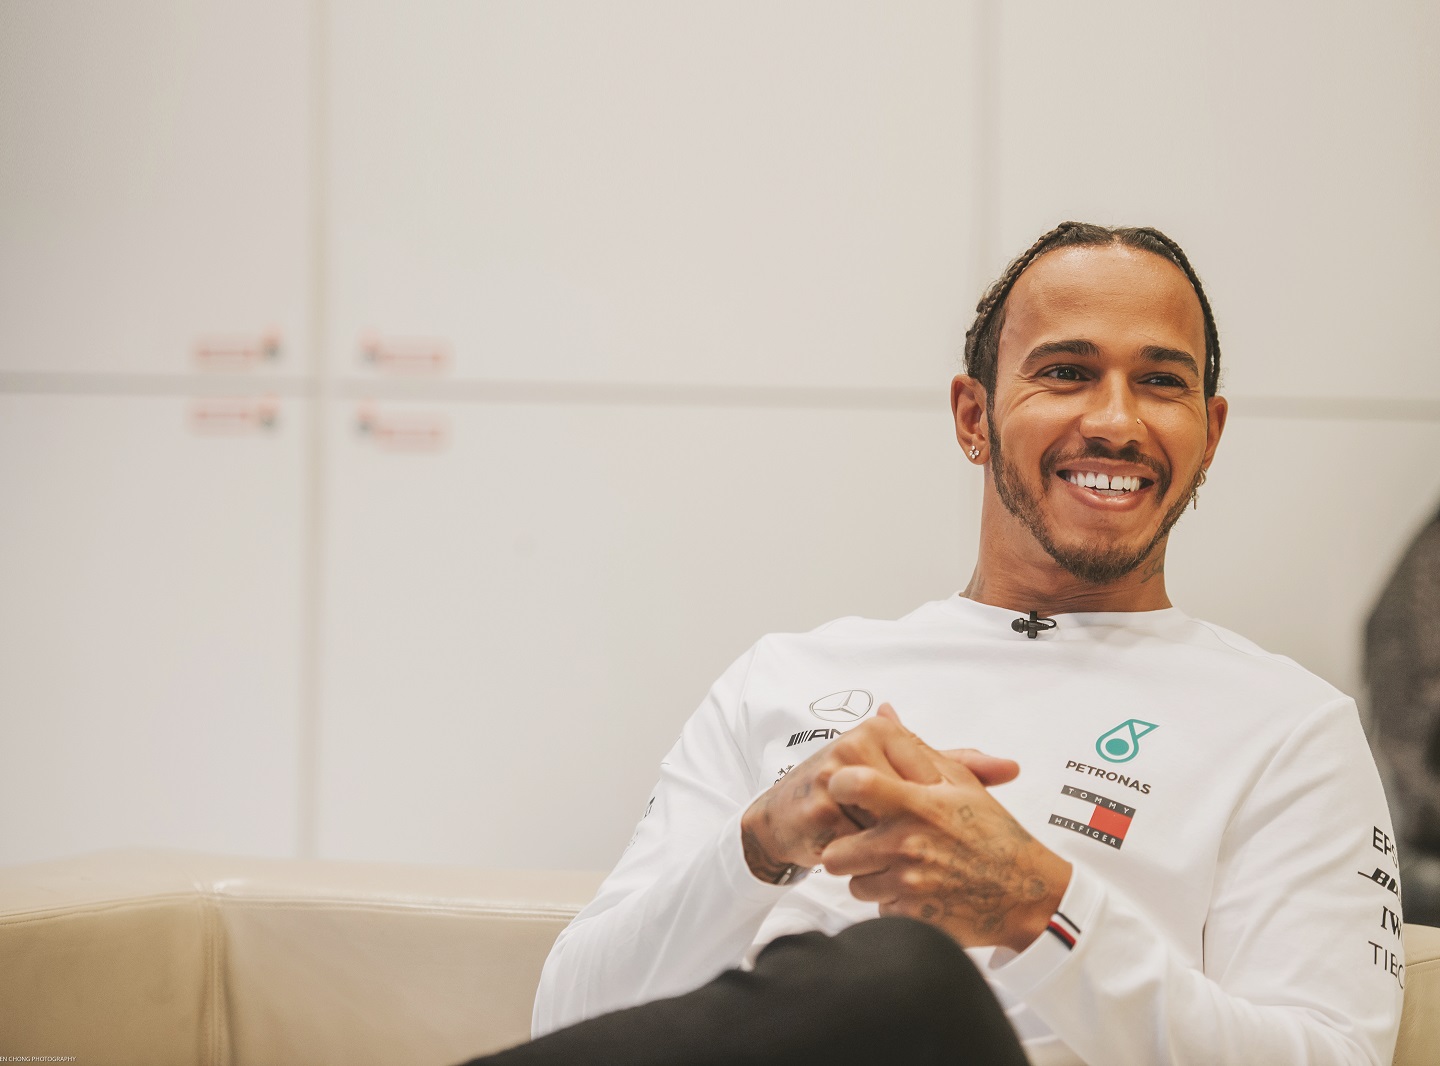 Lewis Hamilton Became Vegan and Still Won, Proving Doubters Wrong